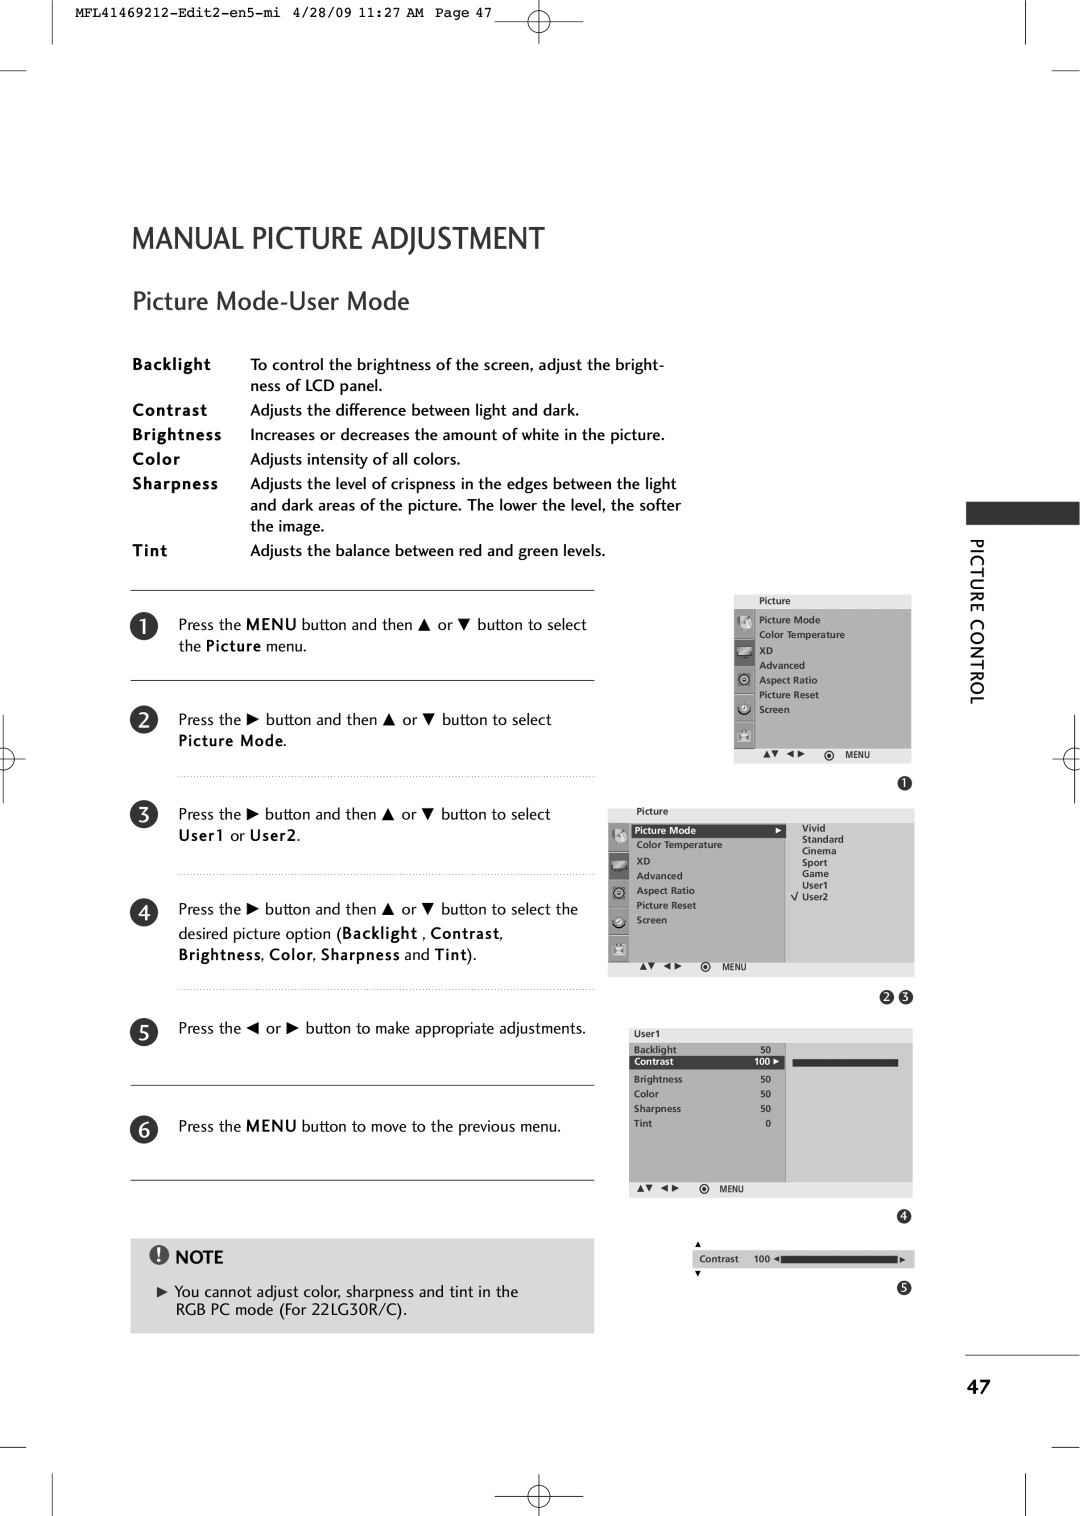 LG Electronics 2230R-MA manual Manual Picture Adjustment, Picture Mode-User Mode 